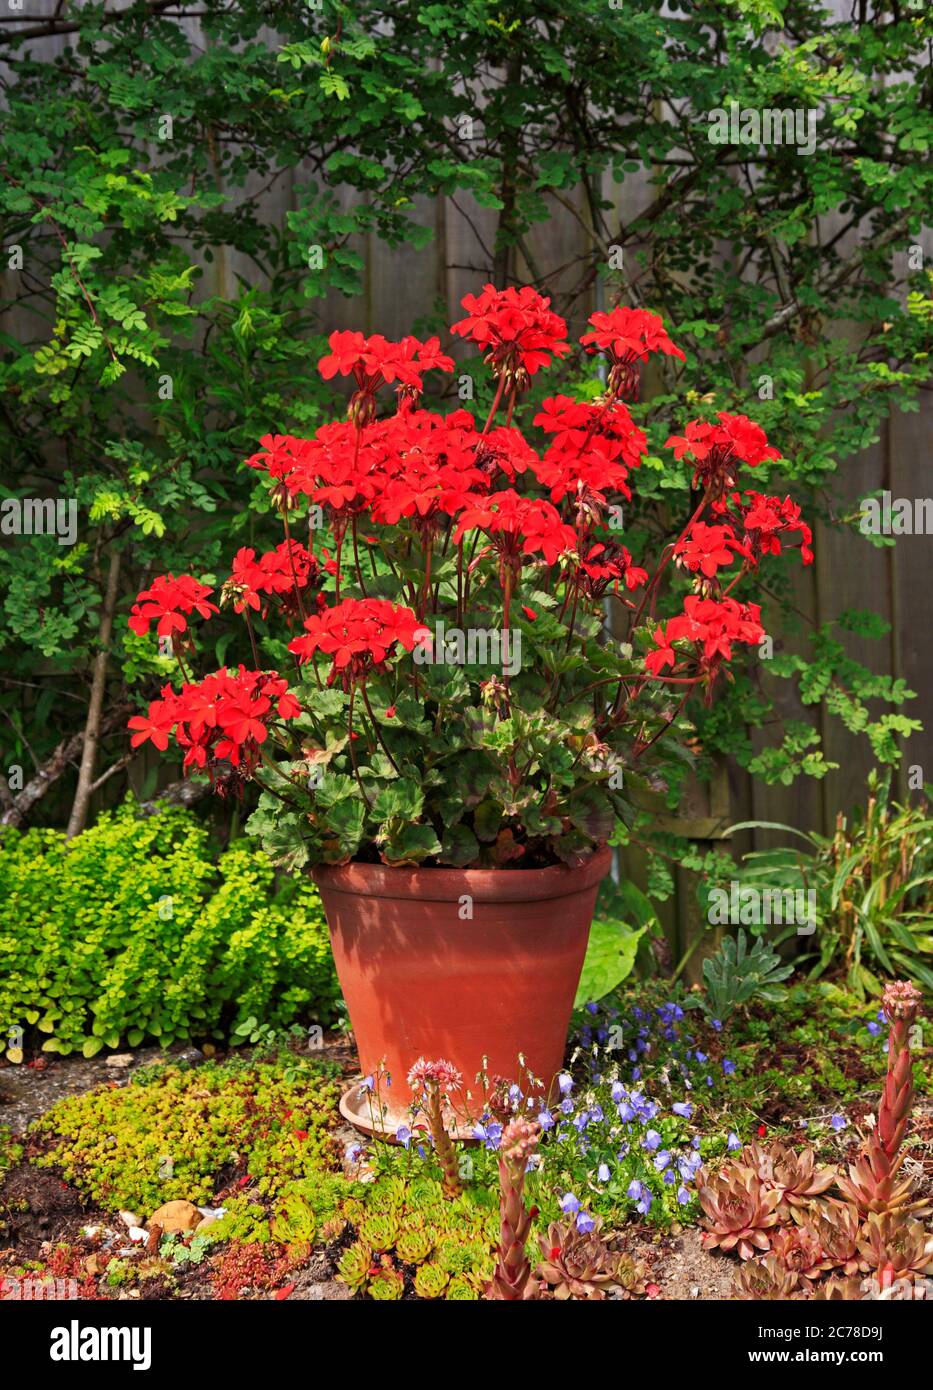 A red Geranium in flower in a pot in a border in an English garden. Stock Photo